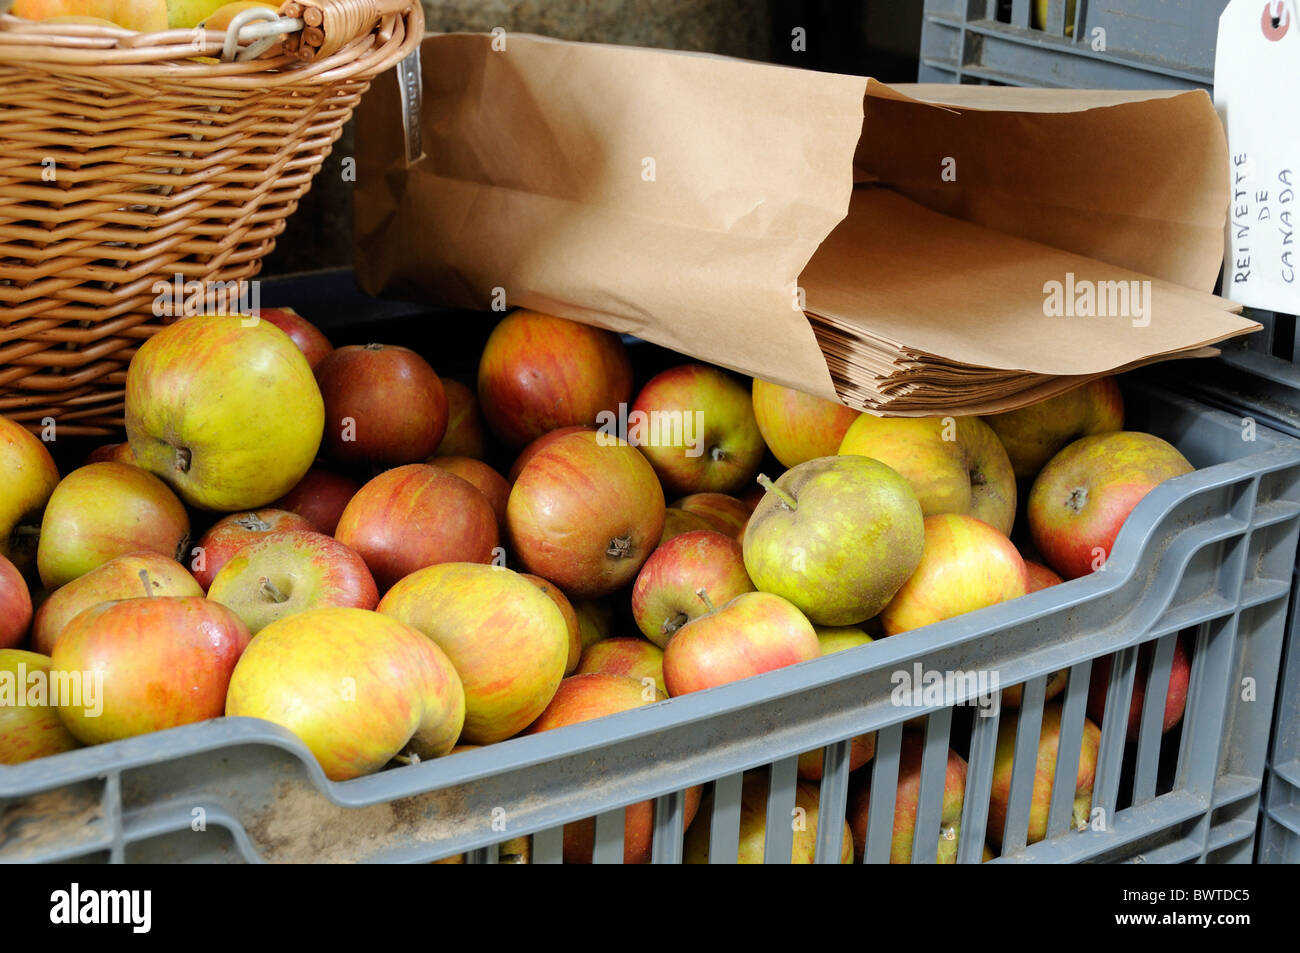 Cox apples with brown paper bags for sale in crate Stock Photo